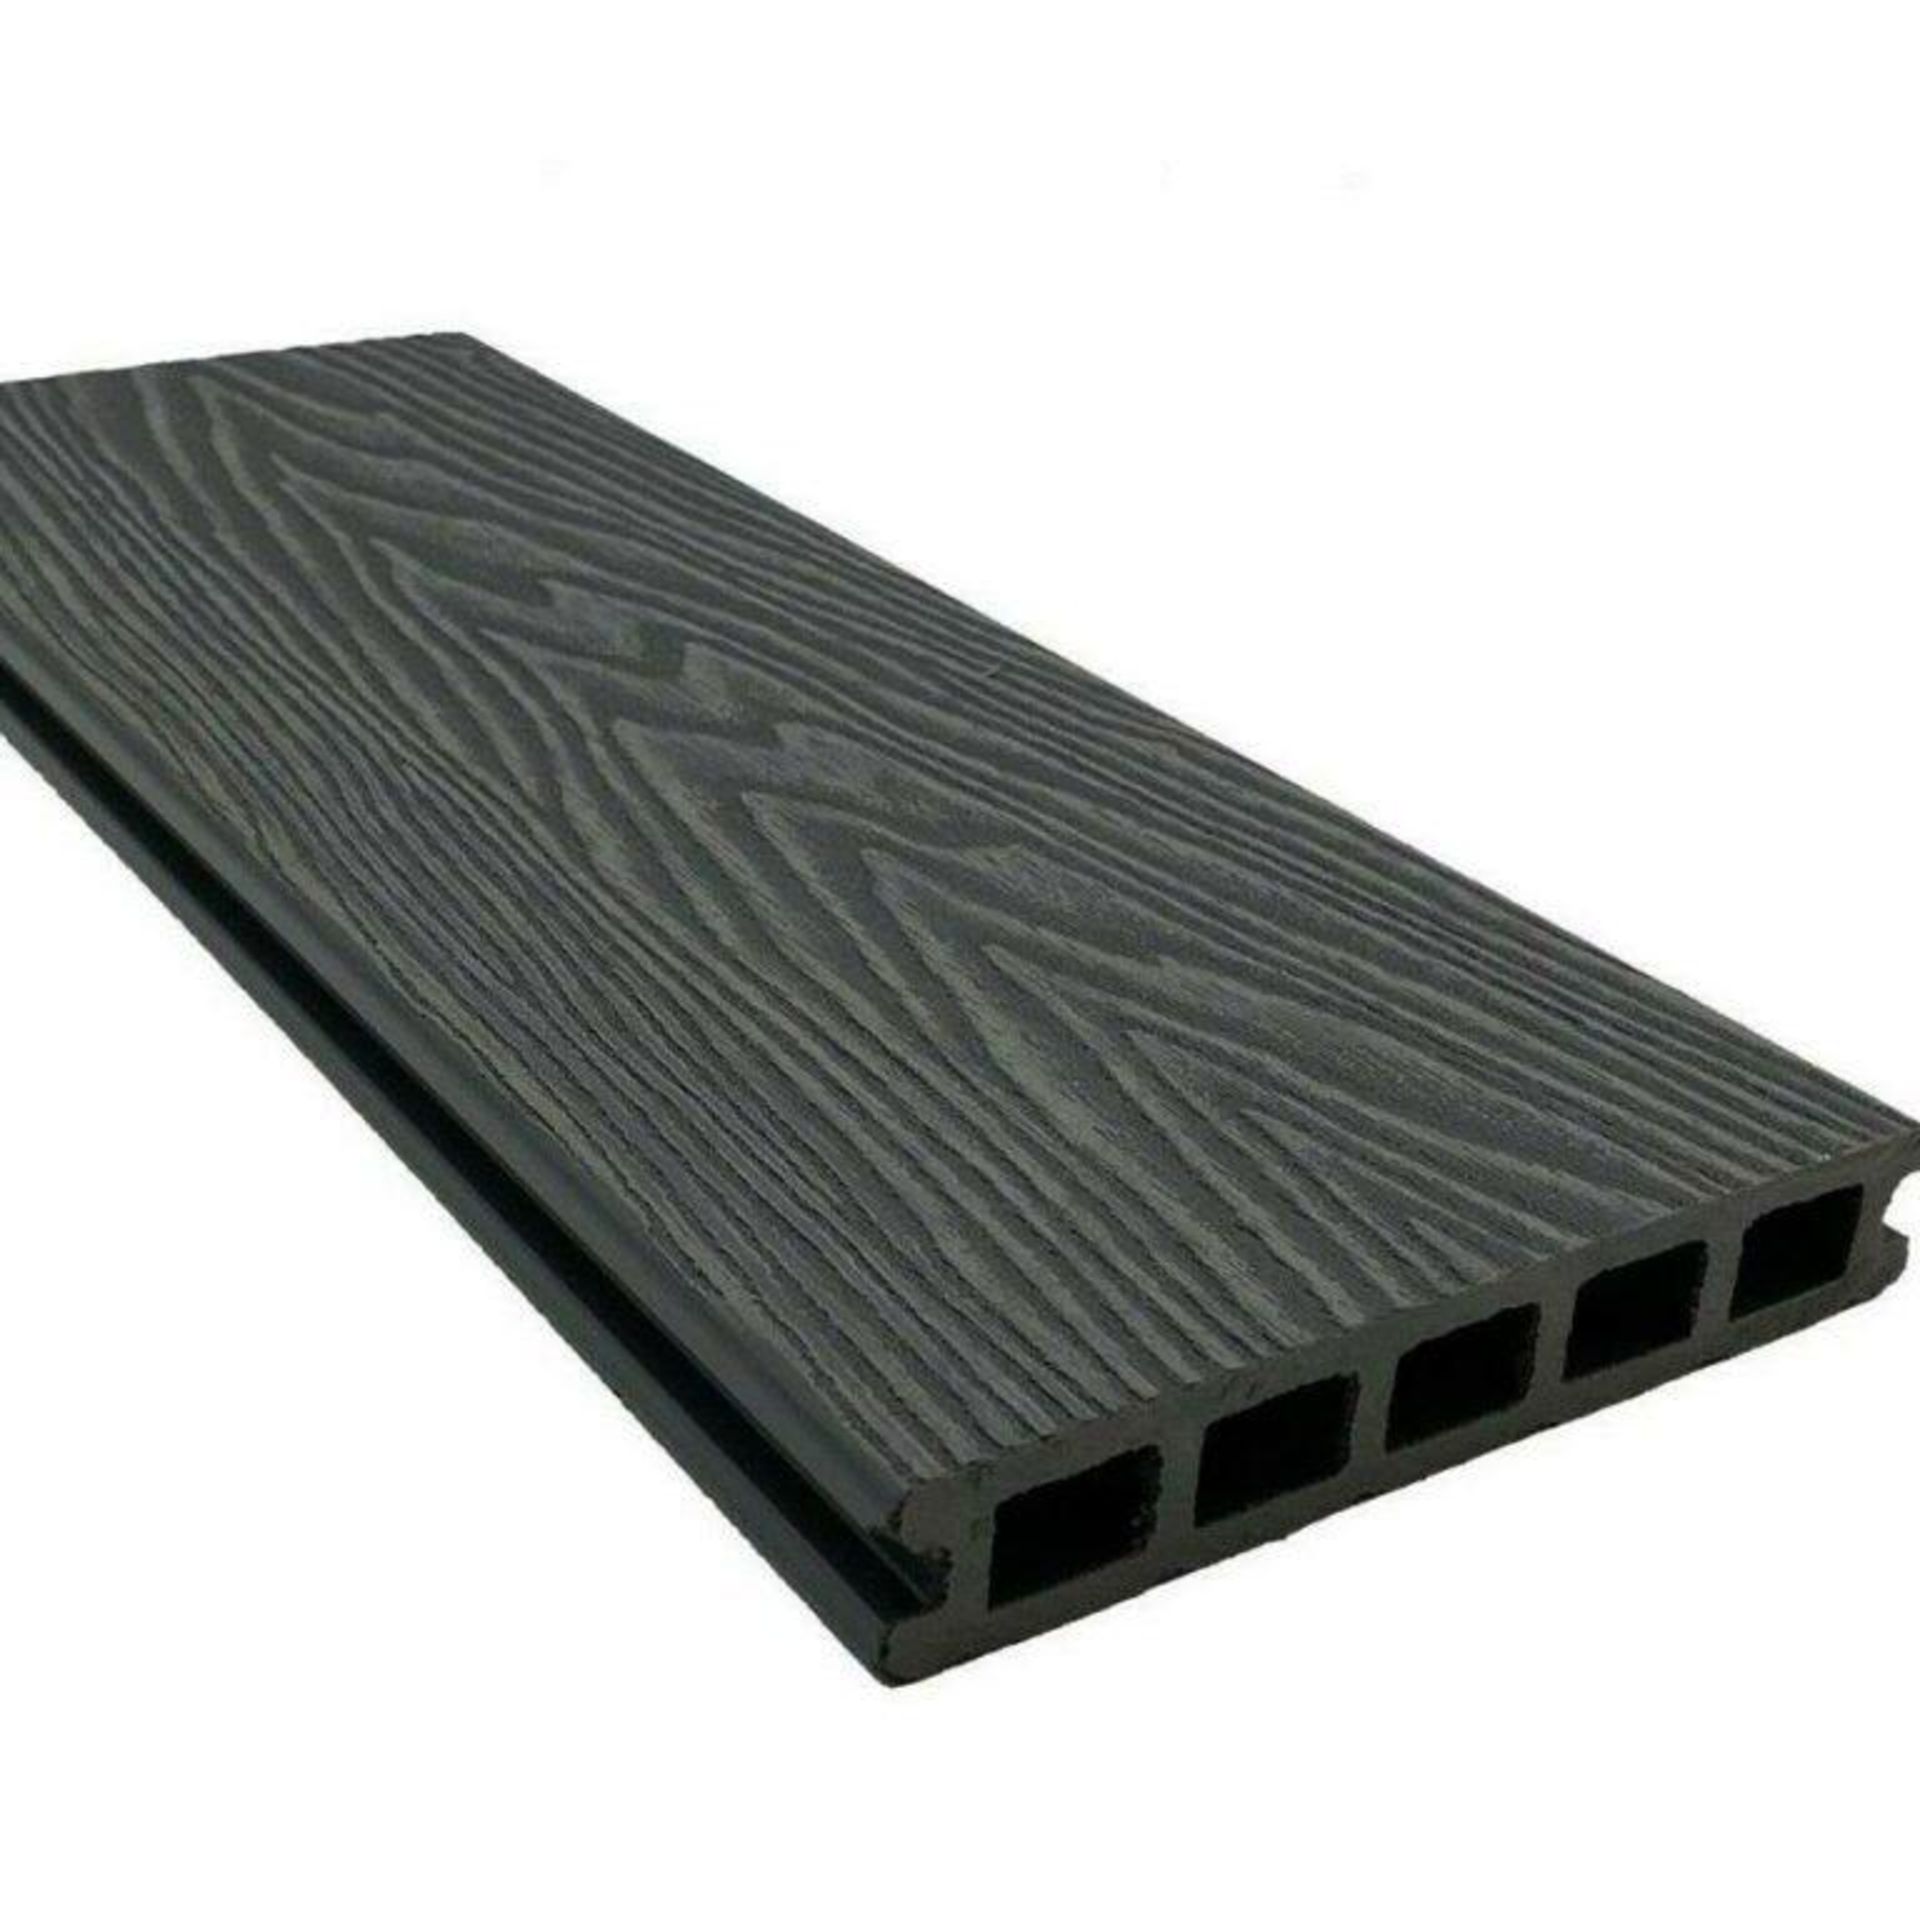 10 x Composite decking boards Colour Ash Grey - Image 2 of 3